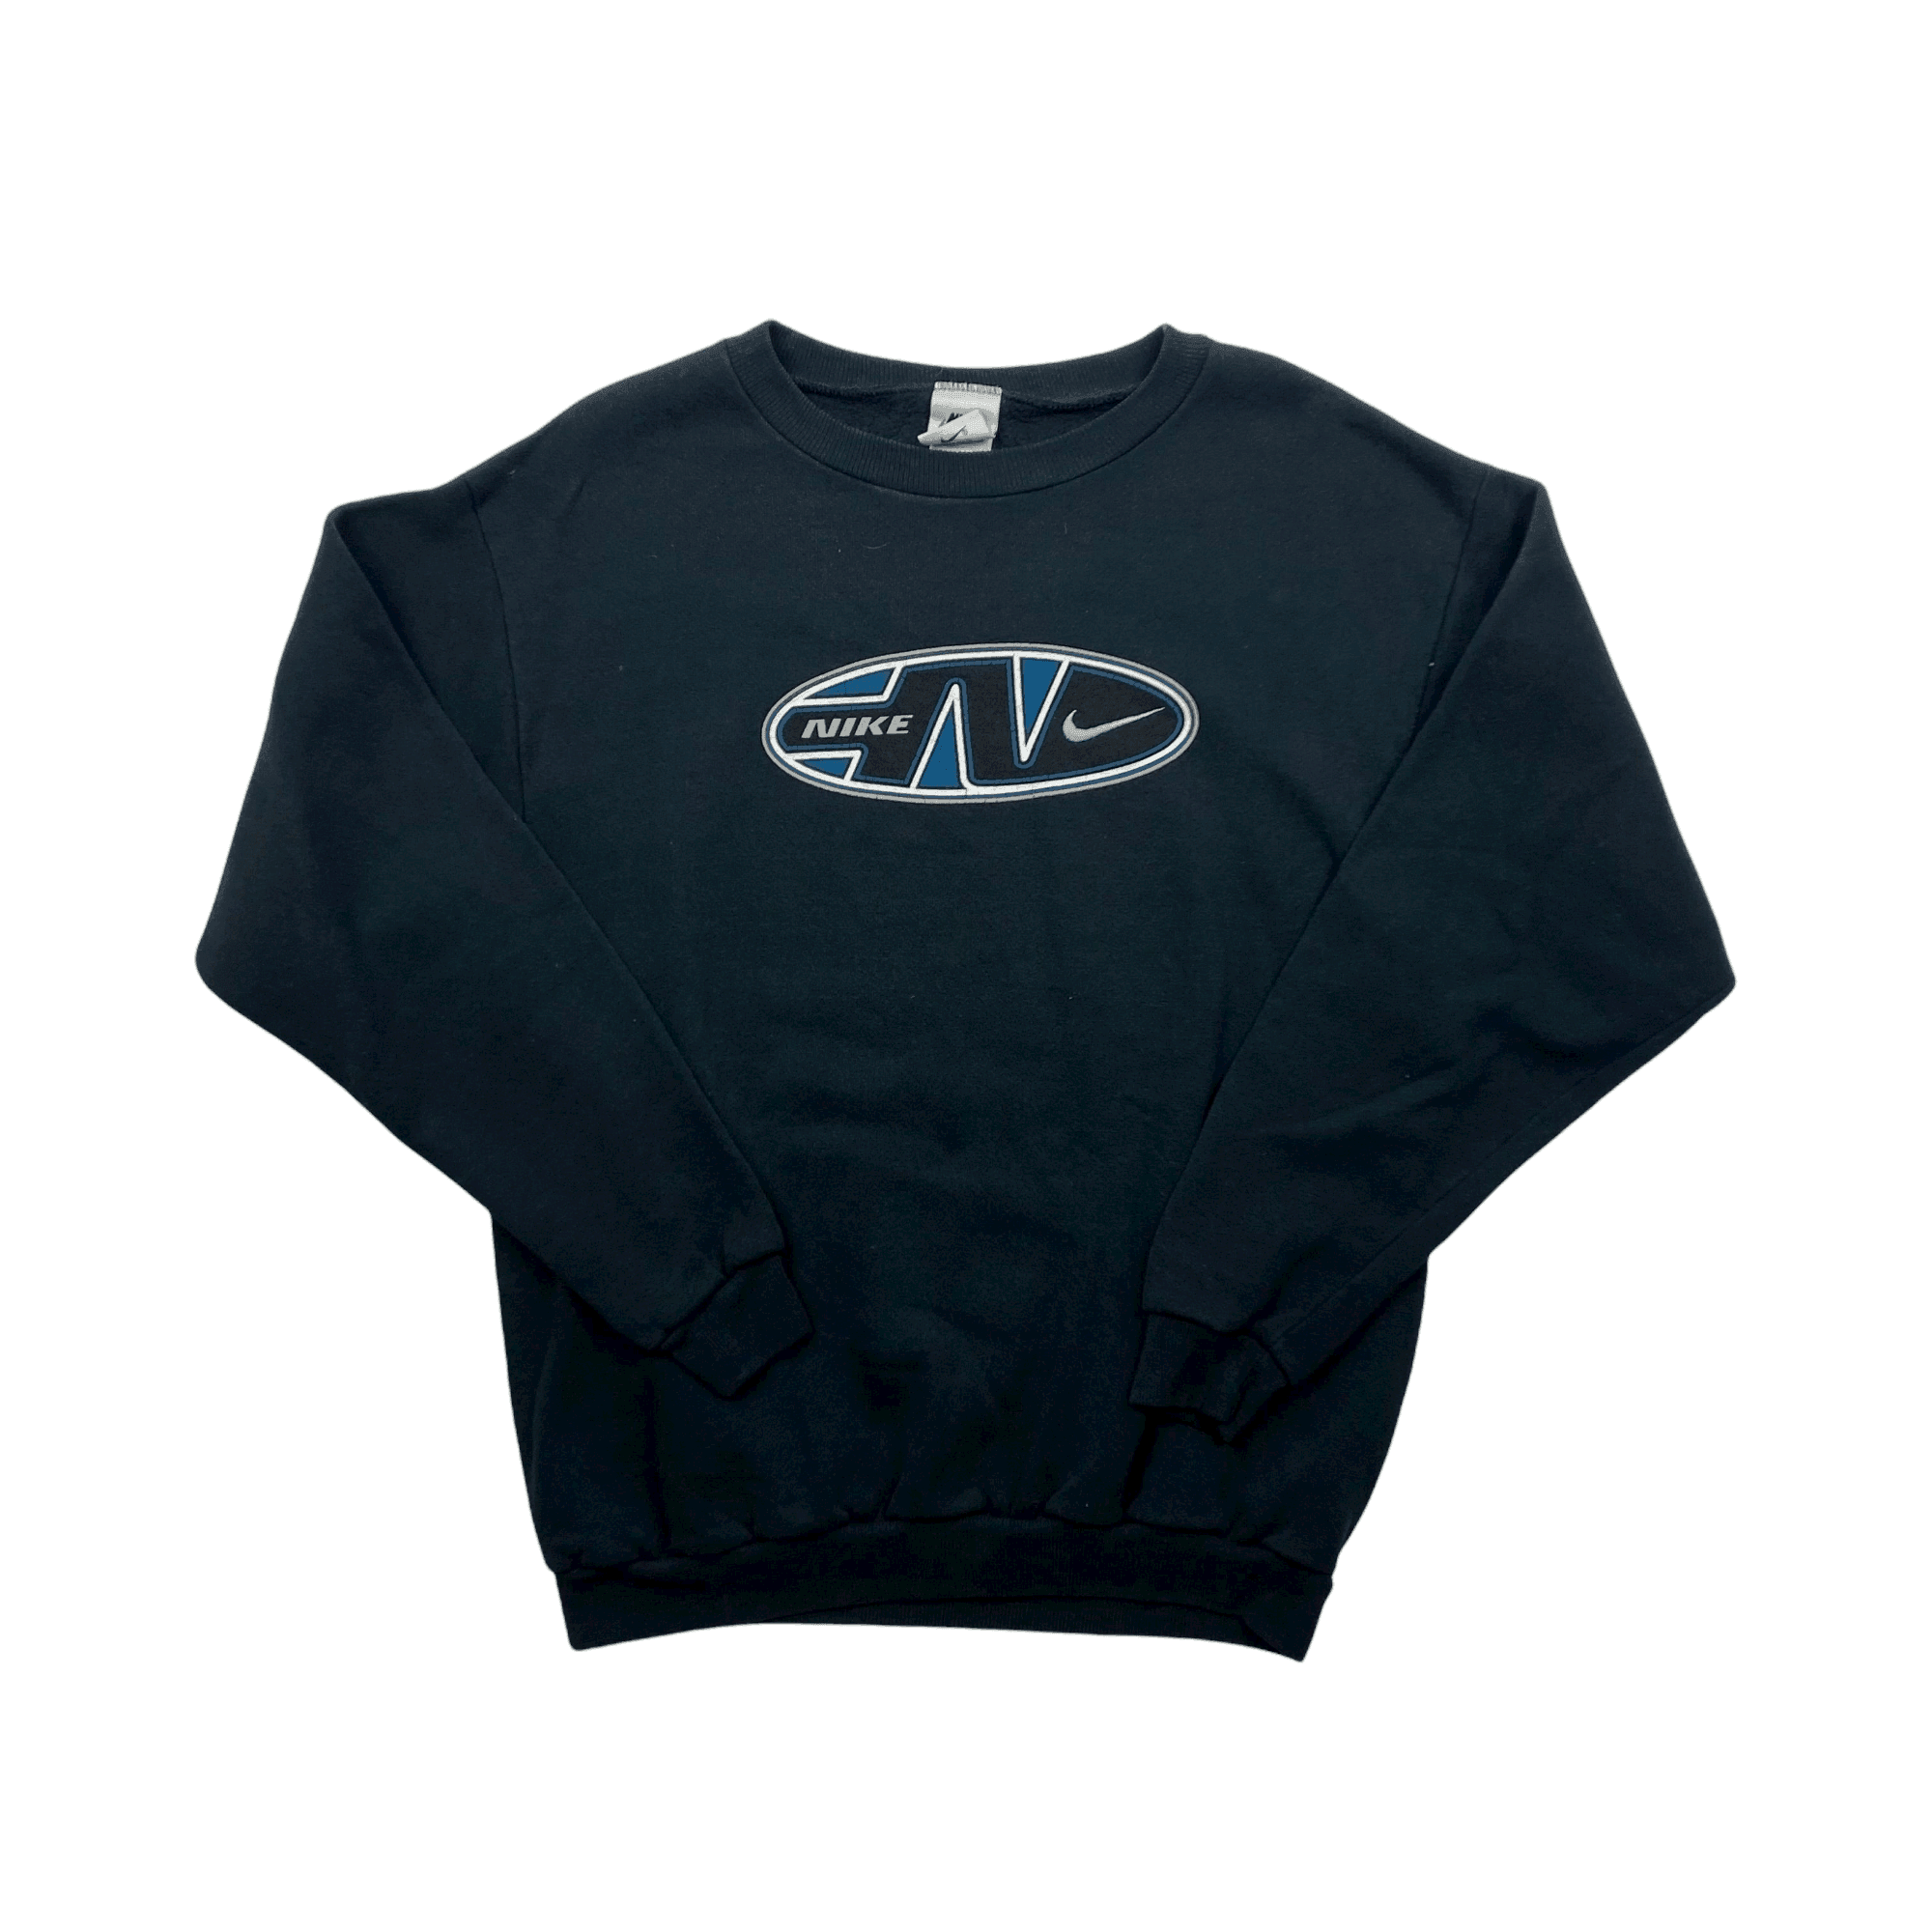 Vintage 90s Black Nike Spell-Out Sweatshirt - Extra Large Boys (Recommended Size - Small) - The Streetwear Studio